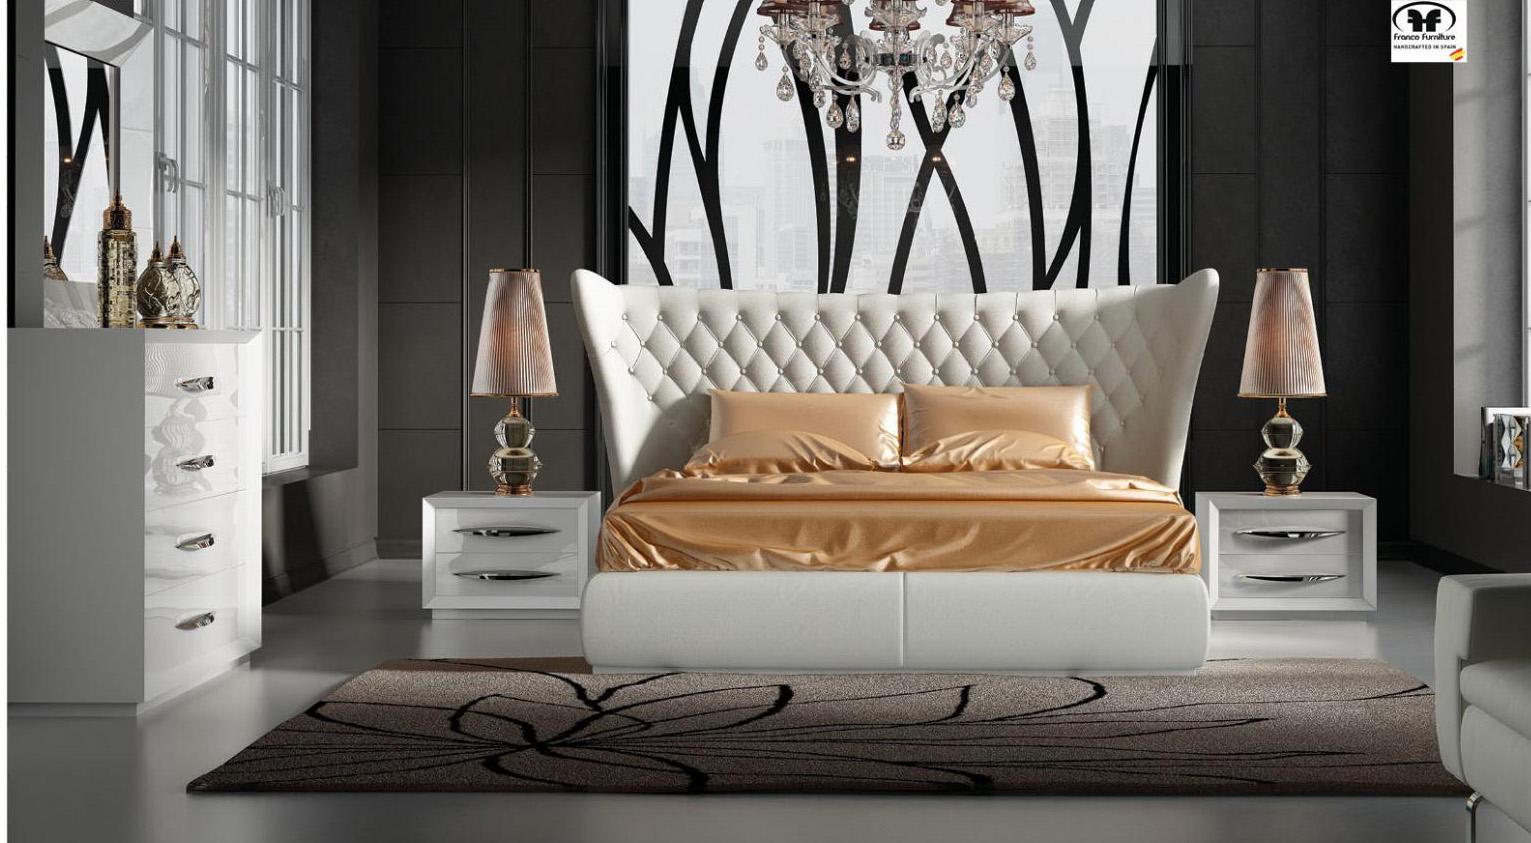 

    
Button Tufted Wing HB White Rone QUEEN Bedroom Set 5Pcs Contemporary Modern
